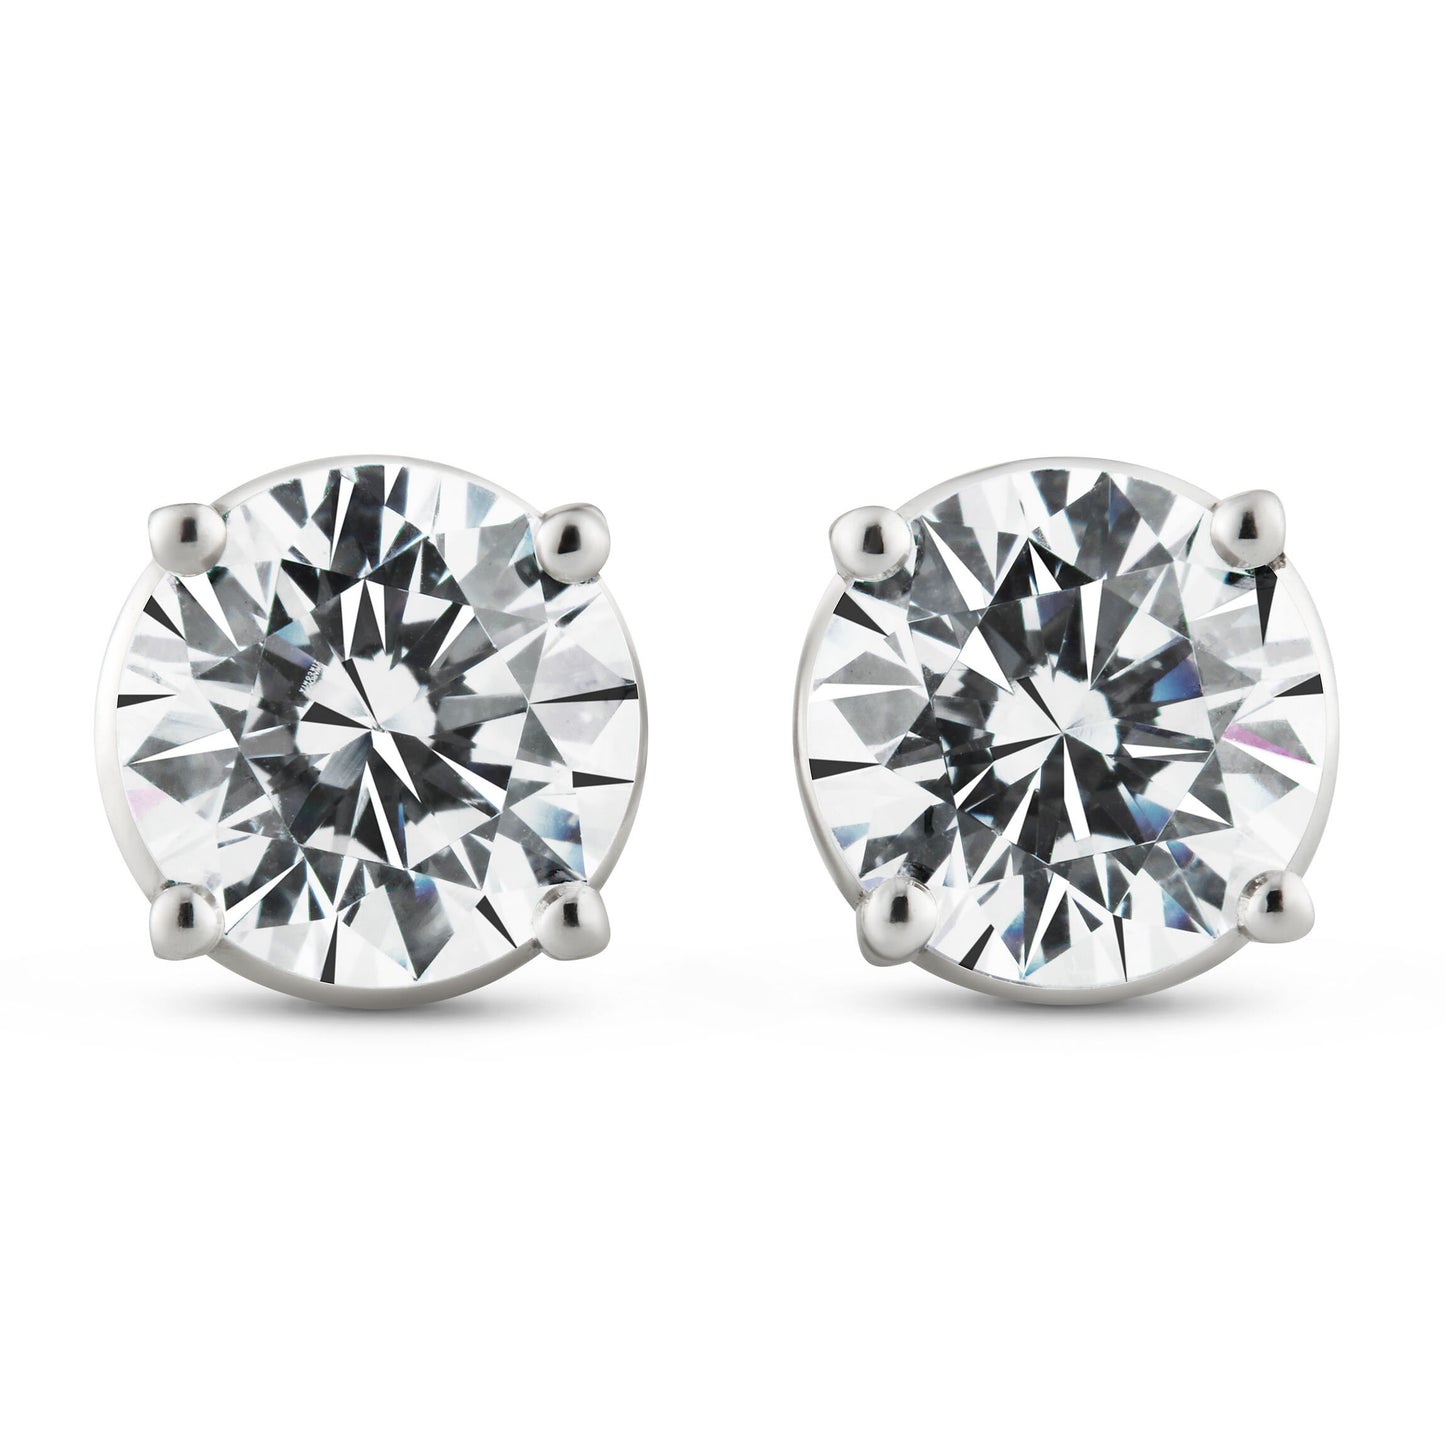 No.1 - Solitaire Earring